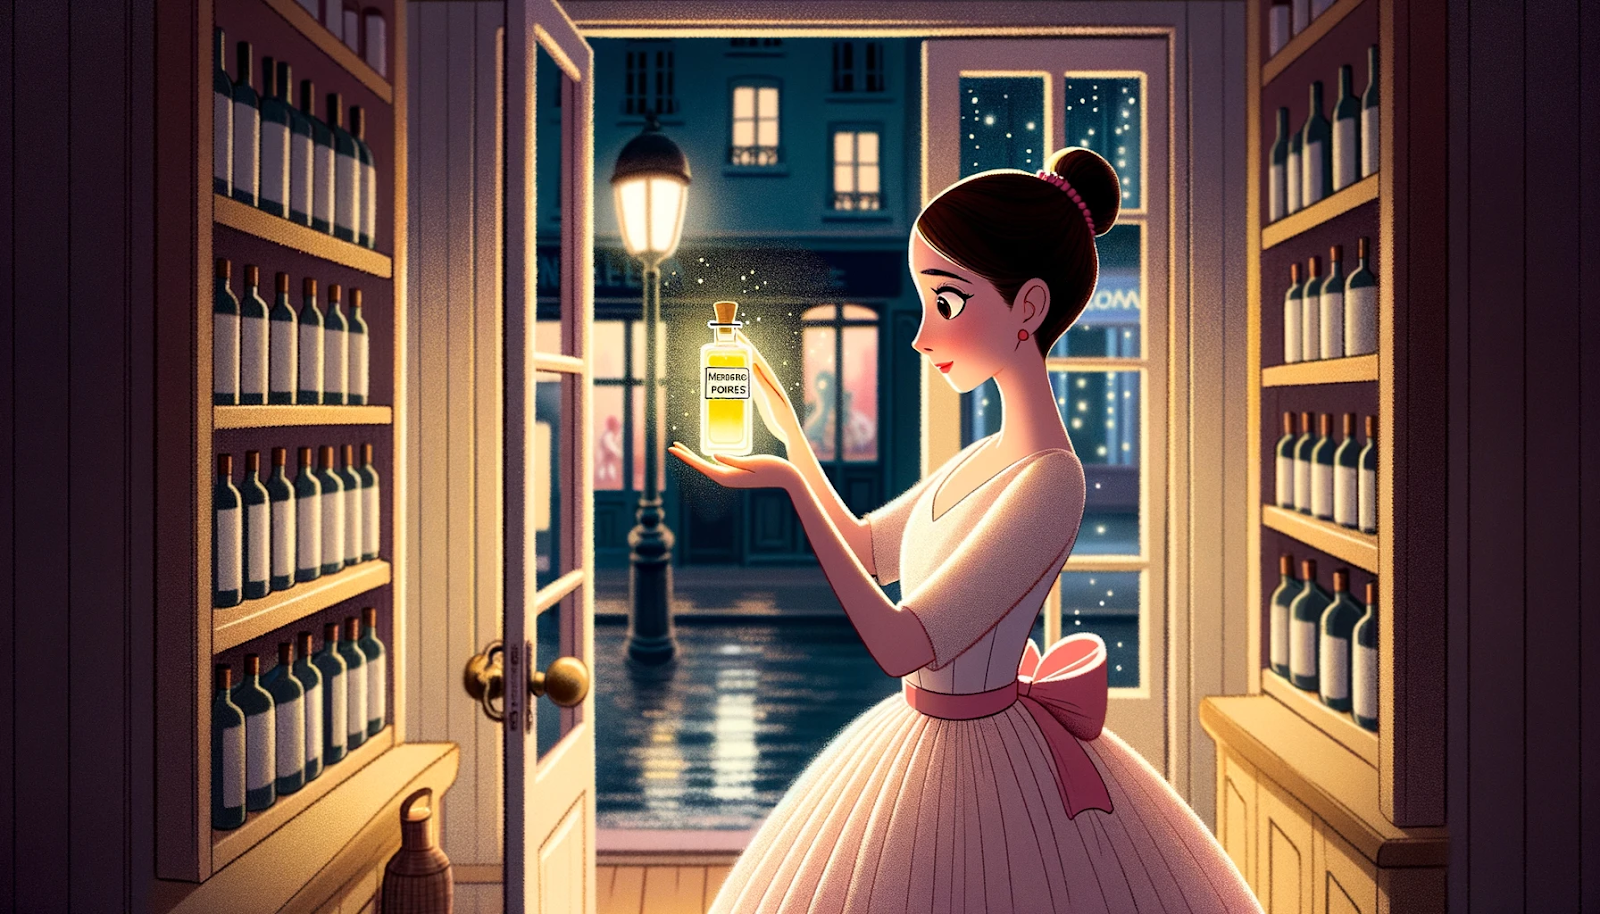 Illustration of Elena, an elegant ballerina, entering Amelie's shop. Her eyes are drawn to the glowing bottle of 'Mémoires Perdues'. The room is illuminated by the soft glow of streetlights from outside. There's a sense of wonder and anticipation in the air.